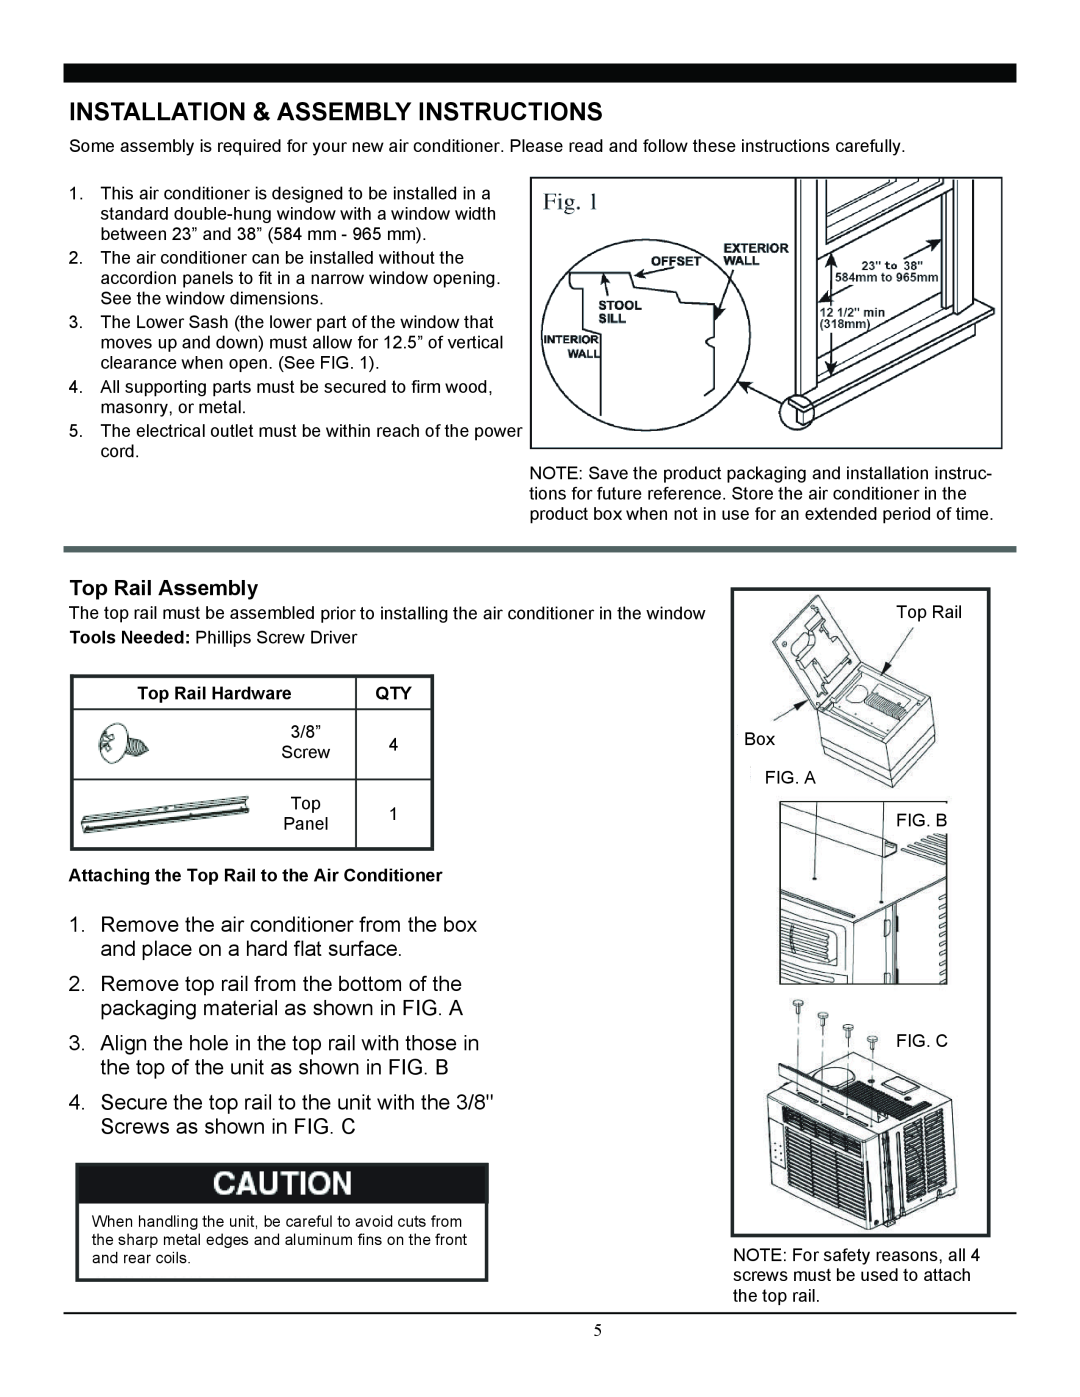 Soleus Air SG-WAC-05SM-C manual Installation & Assembly Instructions, Top Rail Assembly 